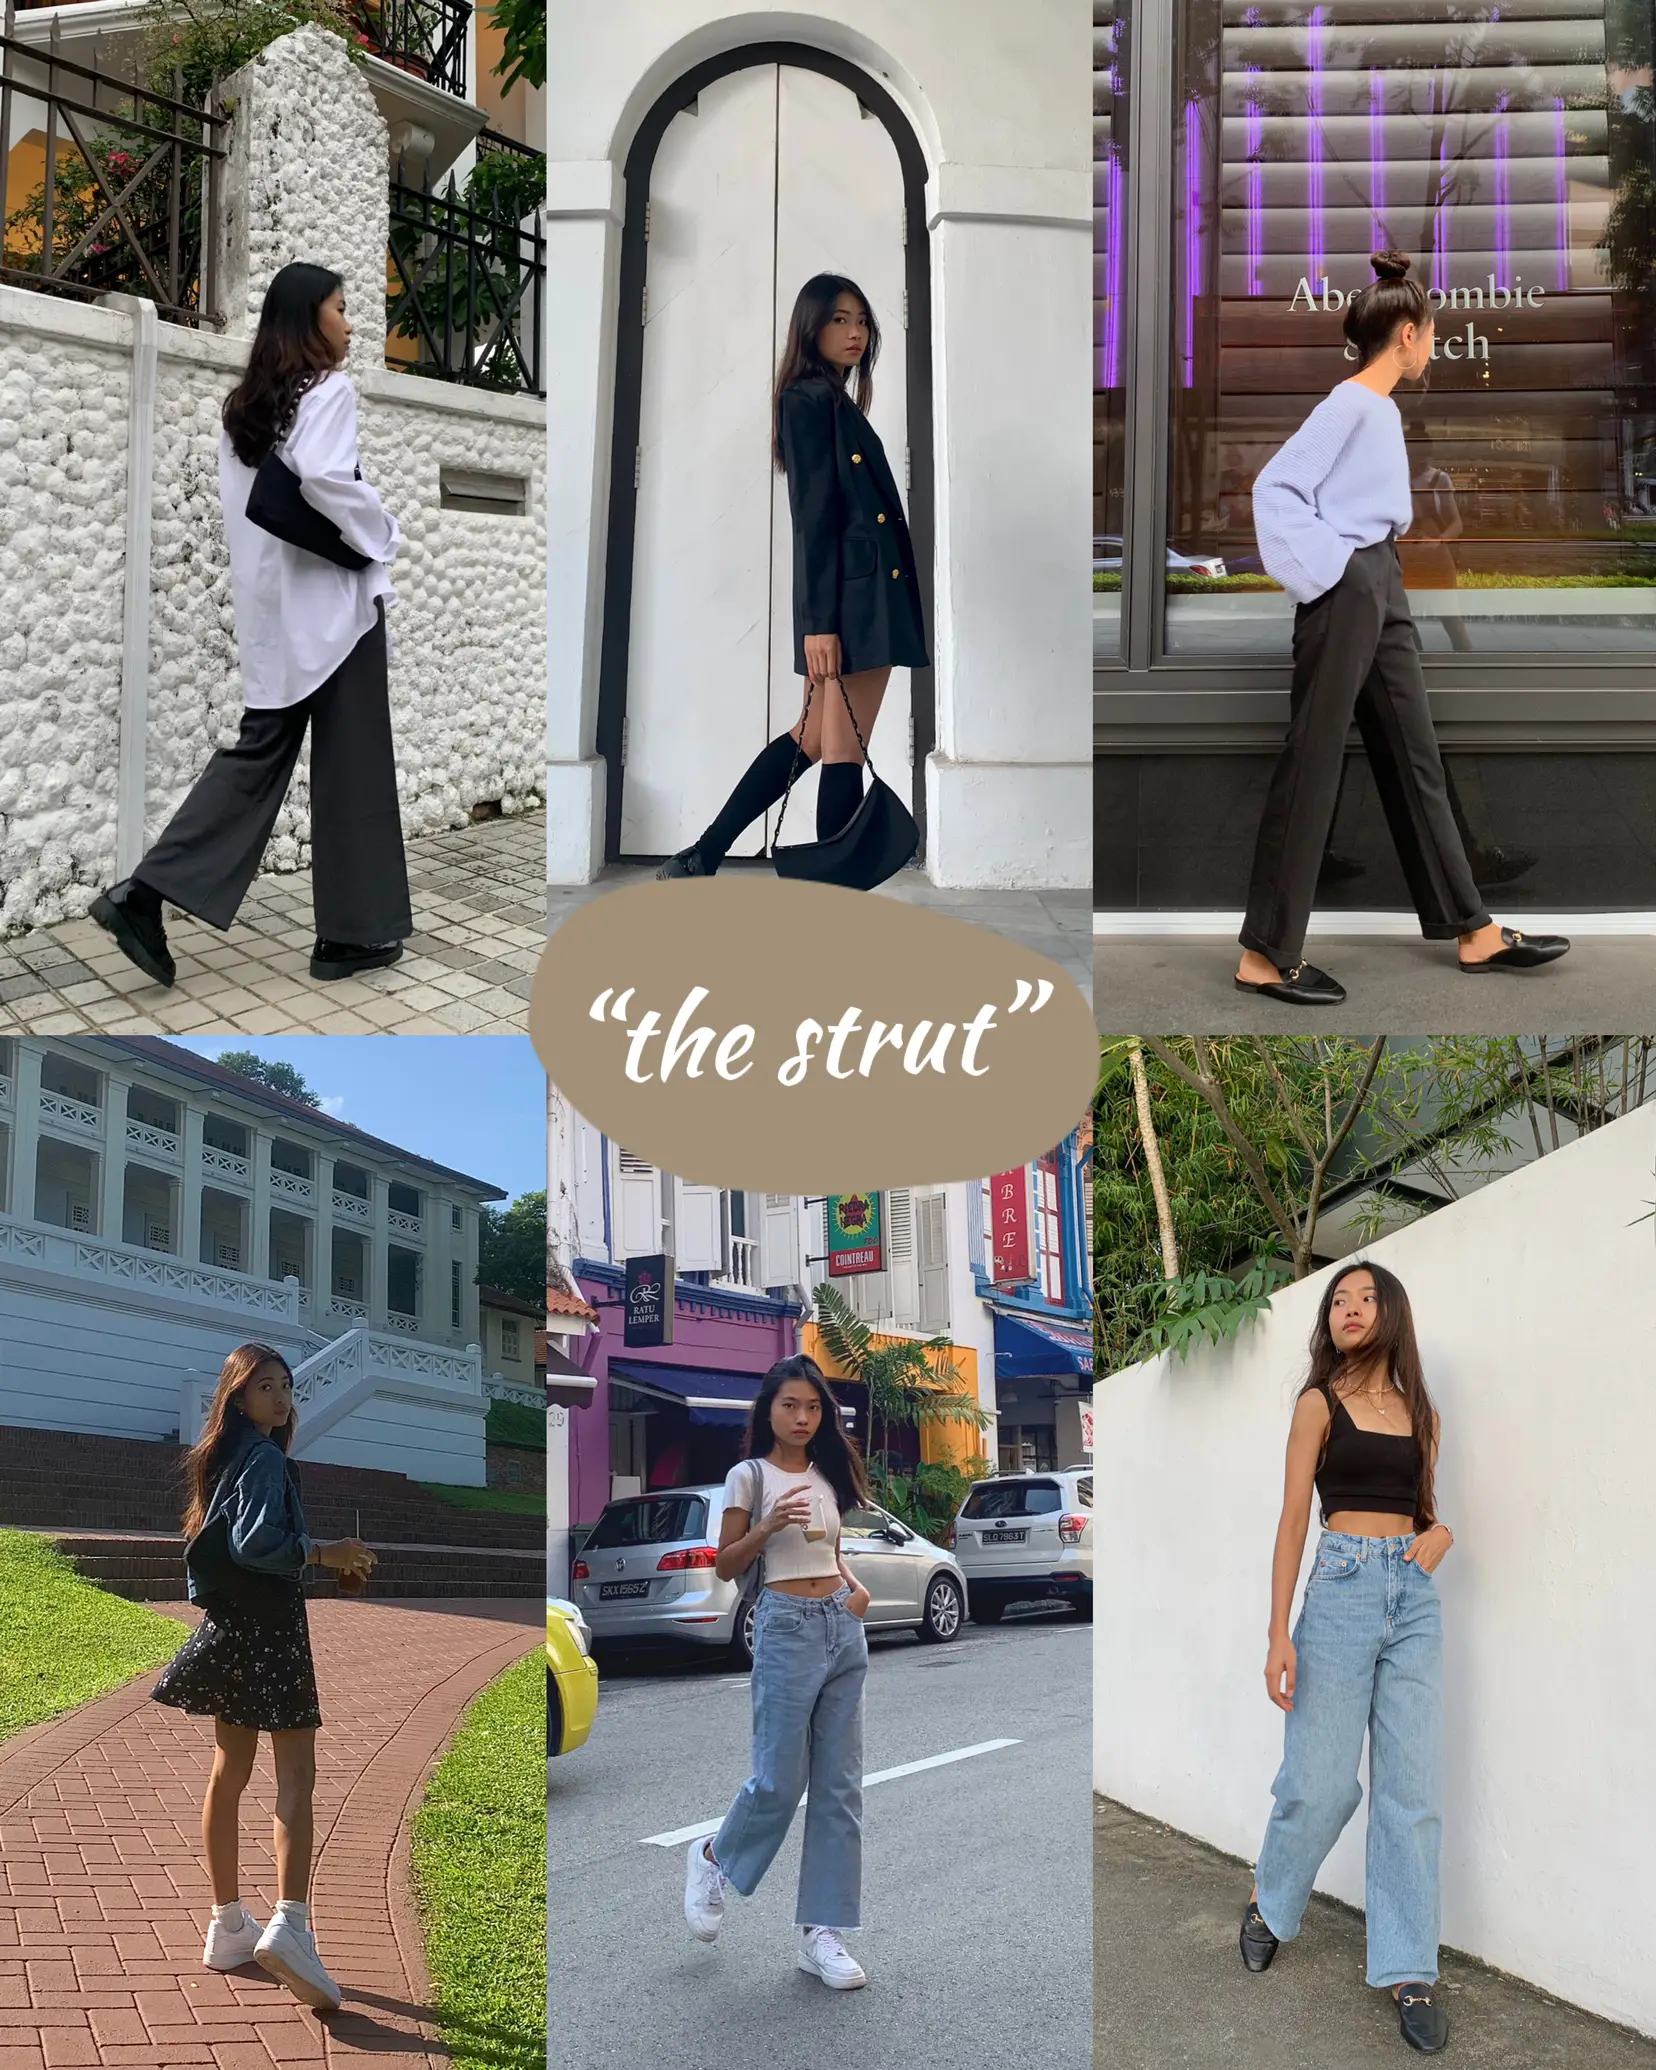 5 easy standing poses, Gallery posted by Crystal Tan